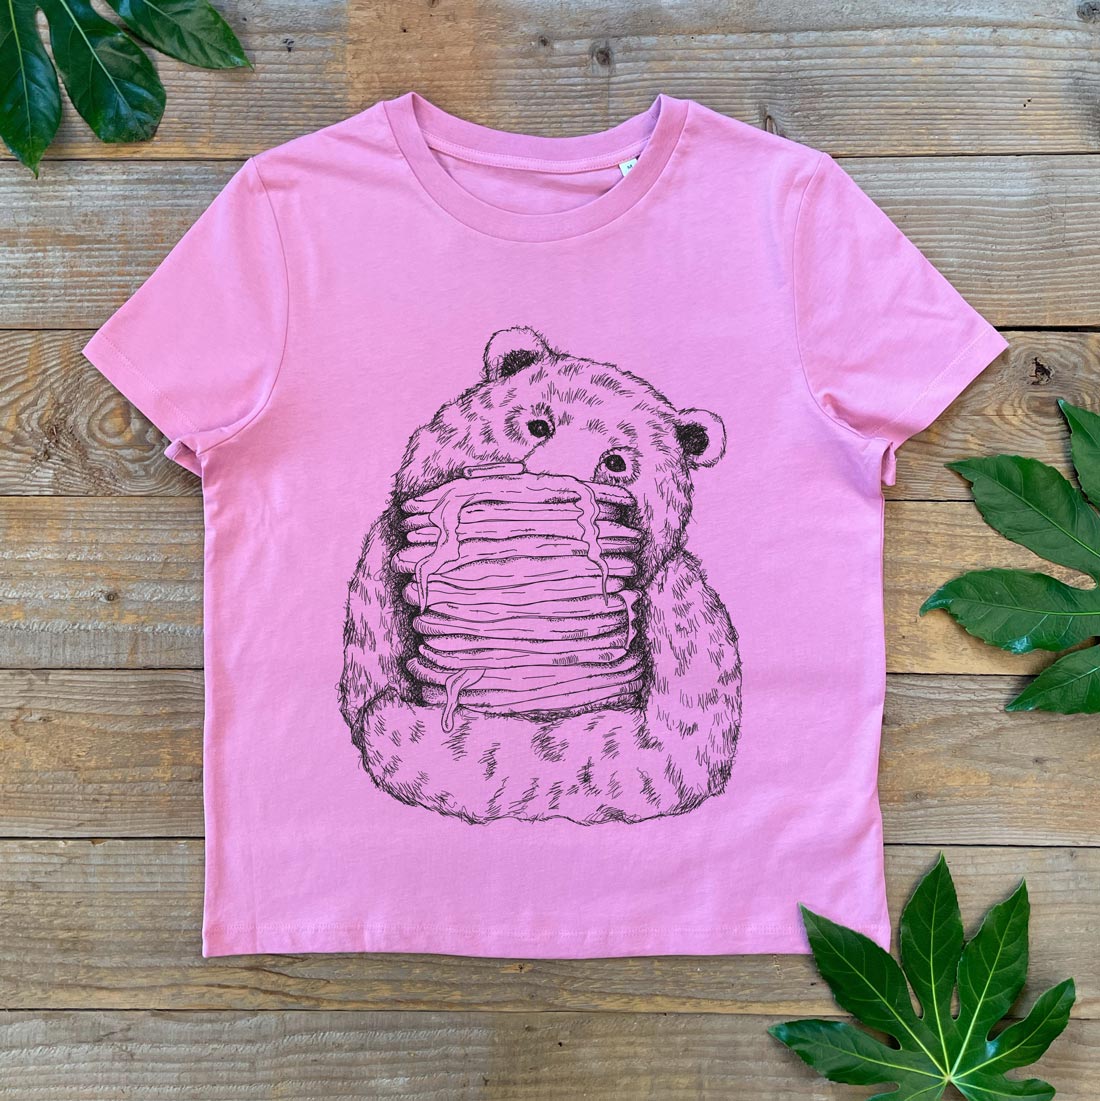 pancakes and bear on pink tee